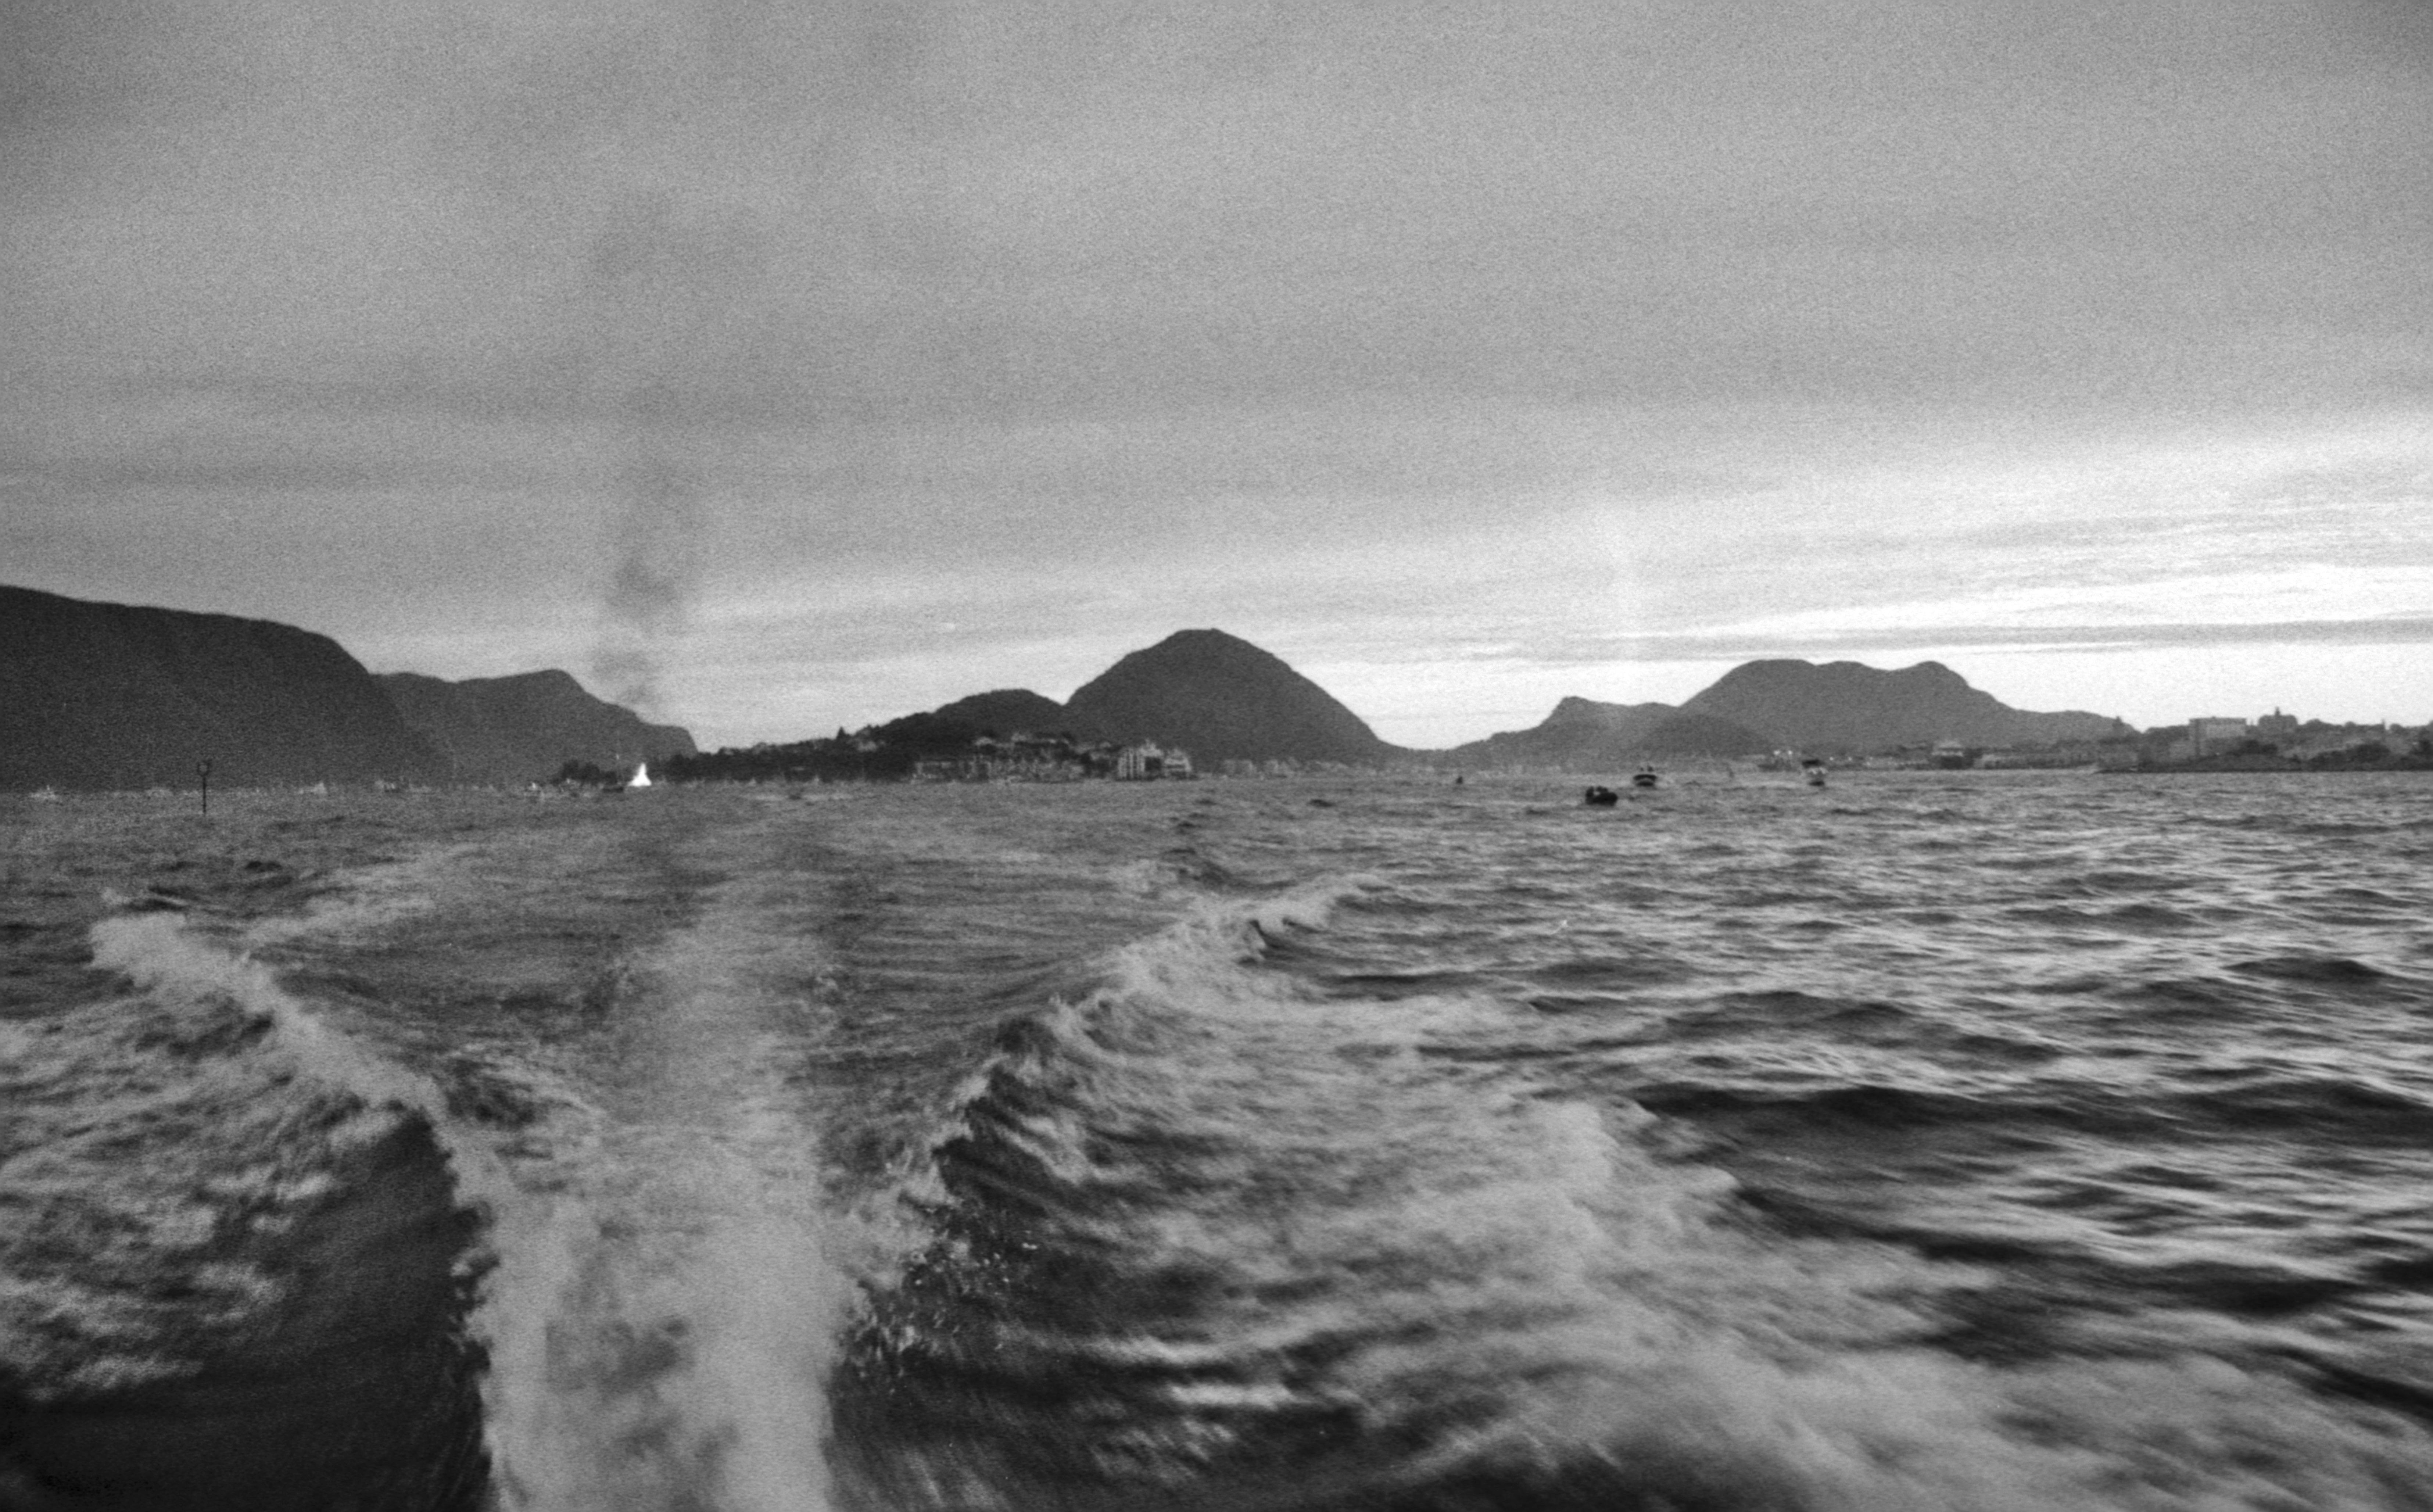 Black and white picture of the sea and some mountains along the coast taken from the back of a boat so you can see the speed waves